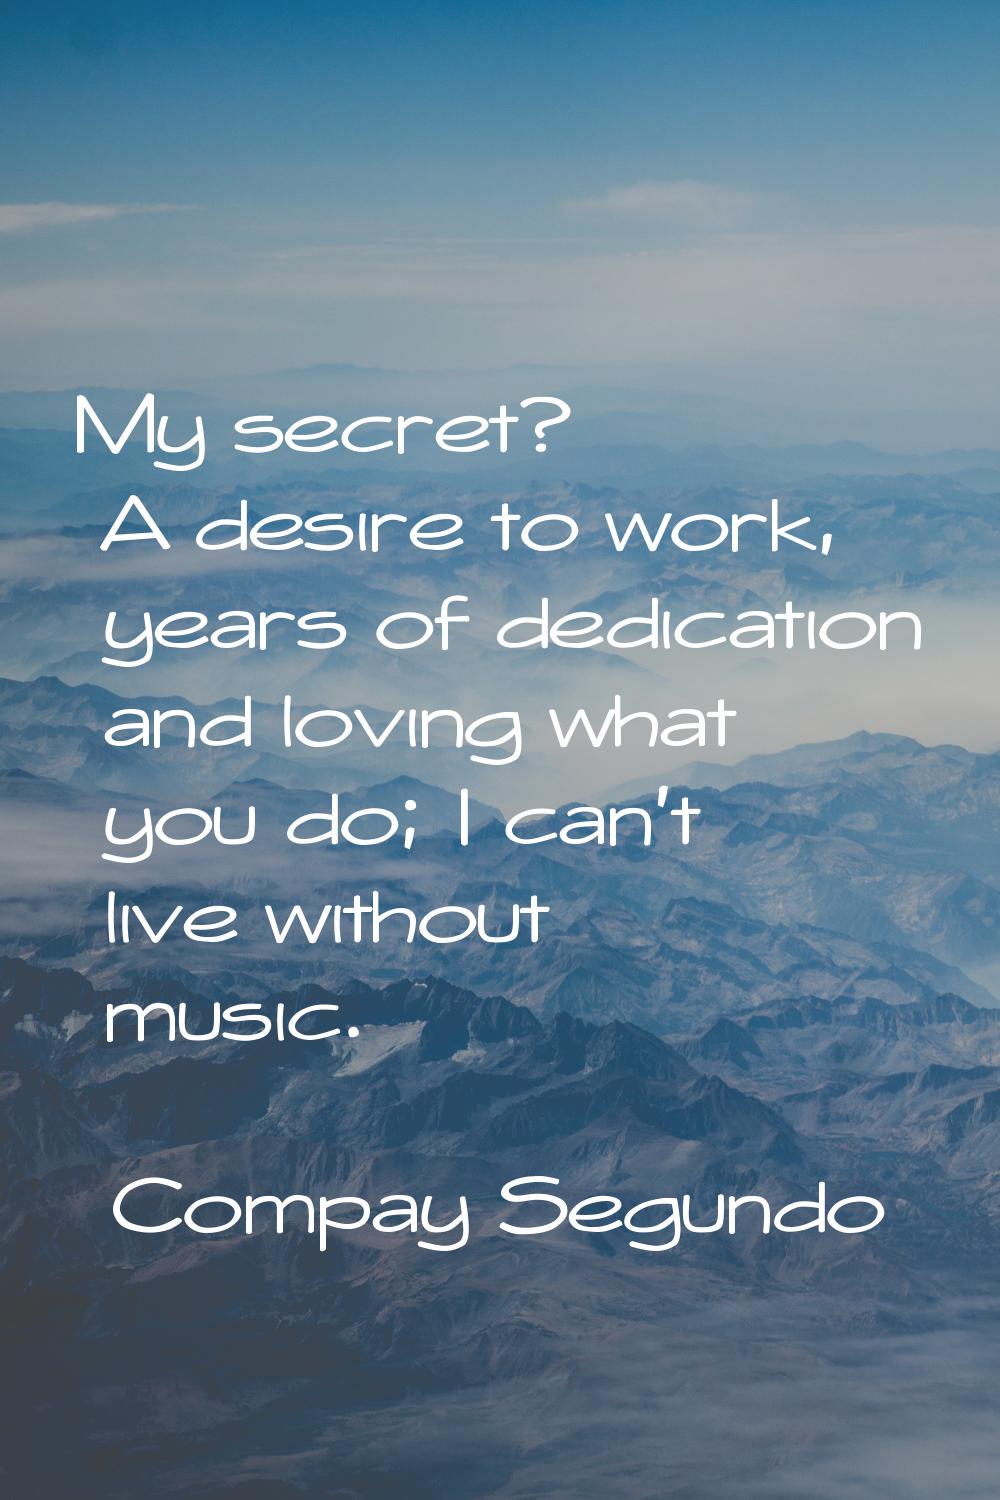 My secret? A desire to work, years of dedication and loving what you do; I can't live without music